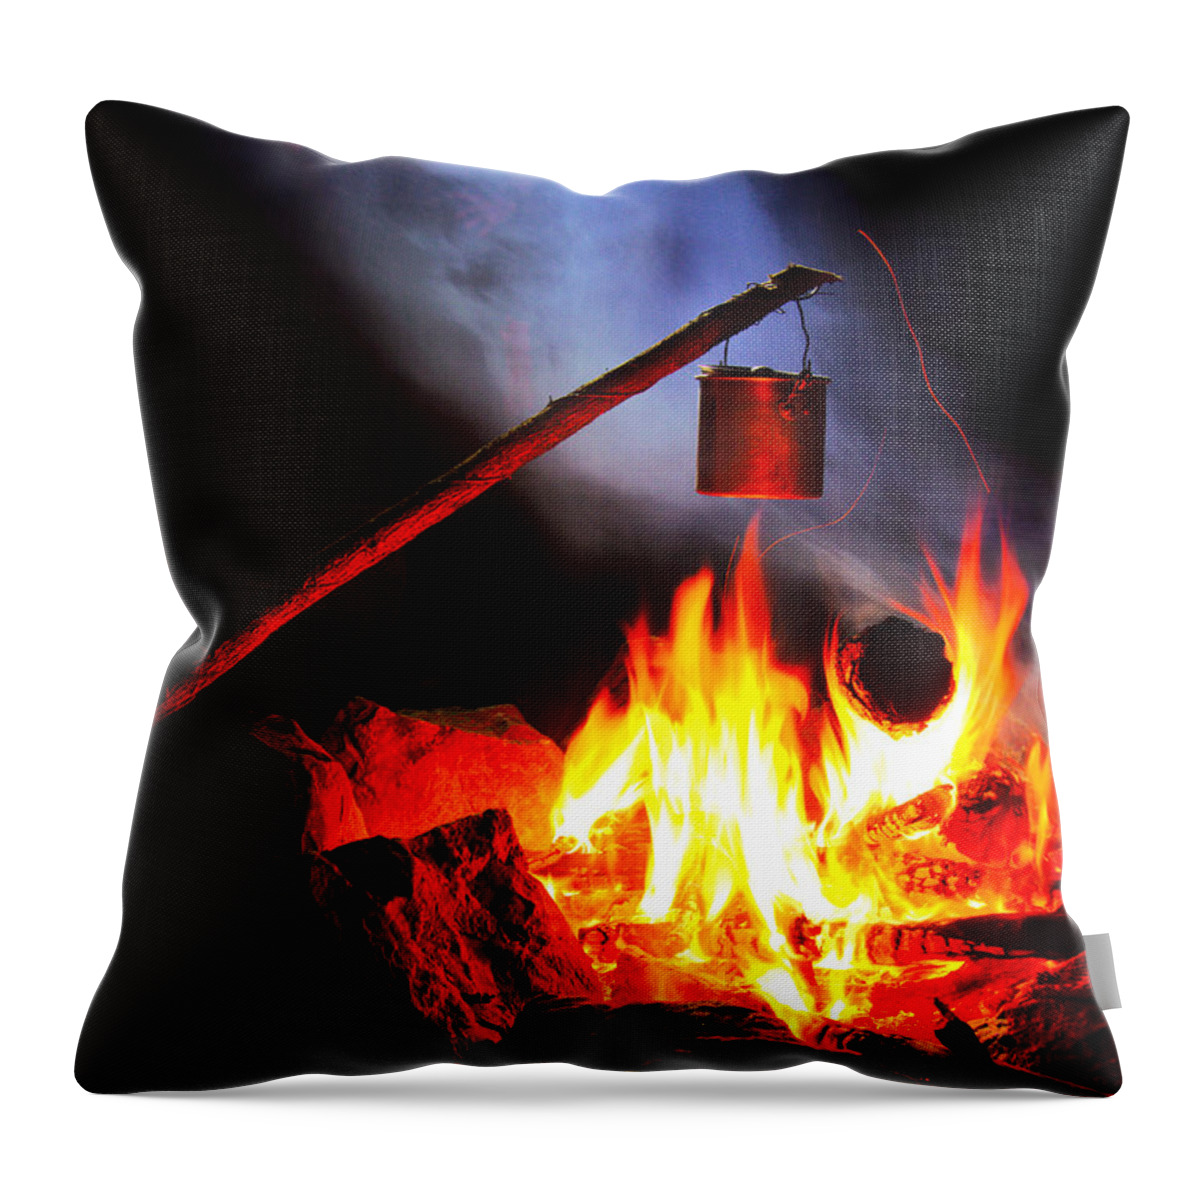 Camping Throw Pillow featuring the photograph Leaning Billy Can Fire by Michael Blaine